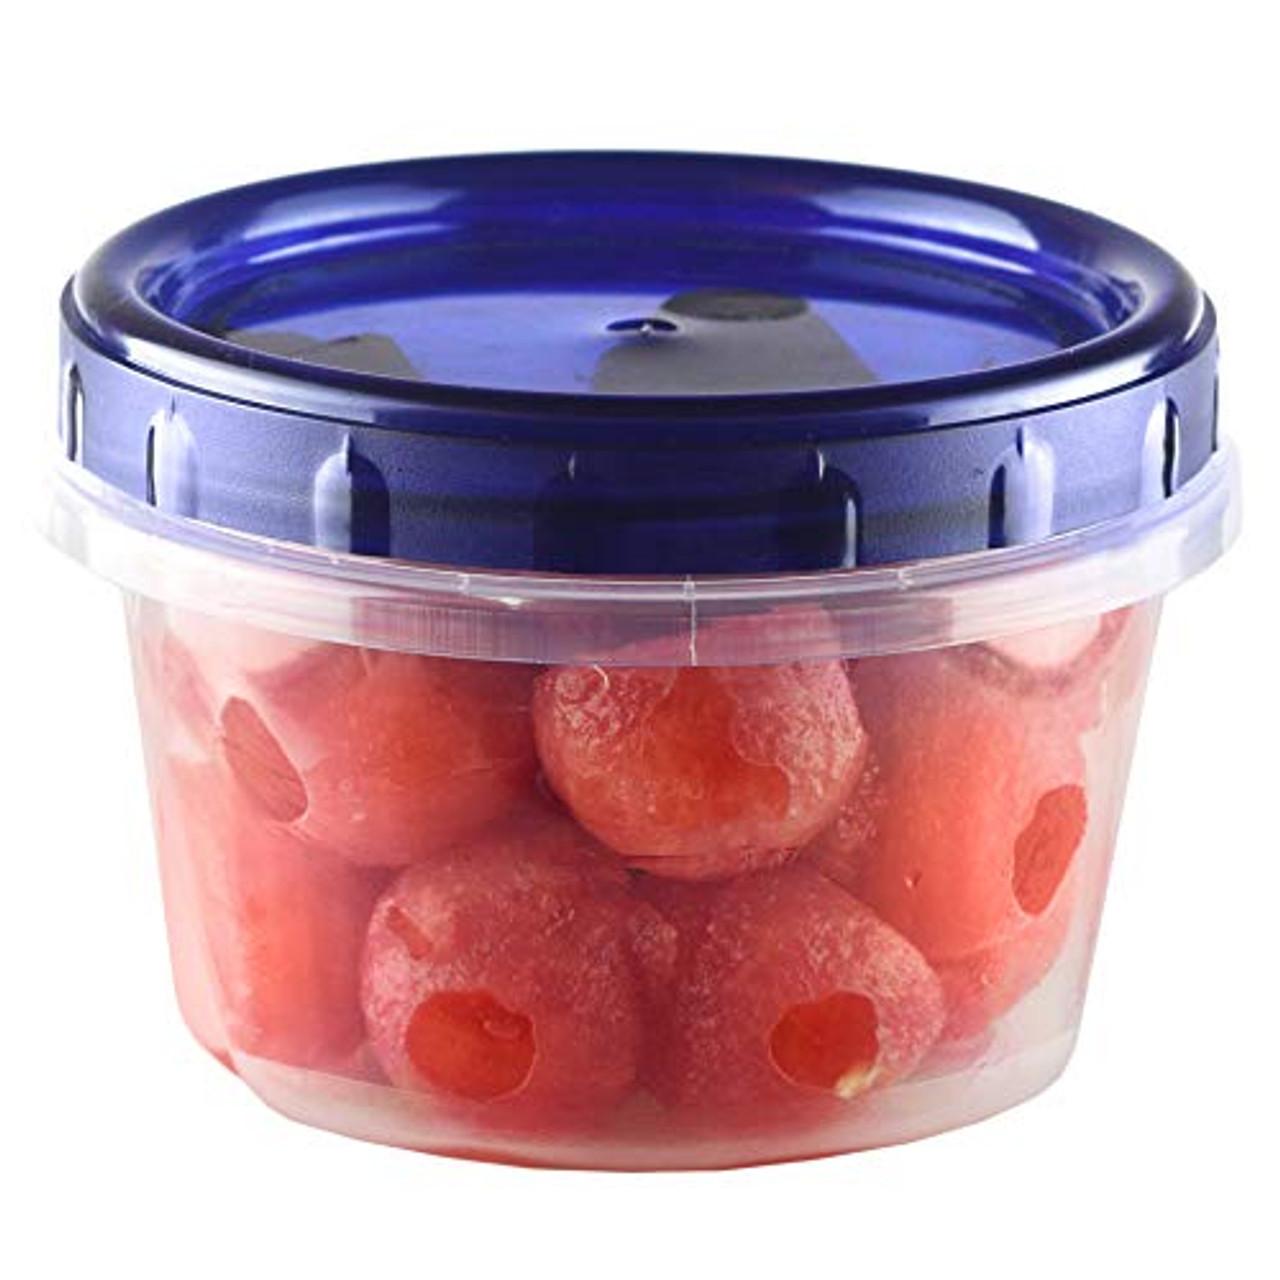 [8 Oz 10 Pack] Twist Top Food Soup Storage Containers with Screw On Lids  Reusable Plastic Freezer Container leakproof, Airtight, Stackable,  Microwave